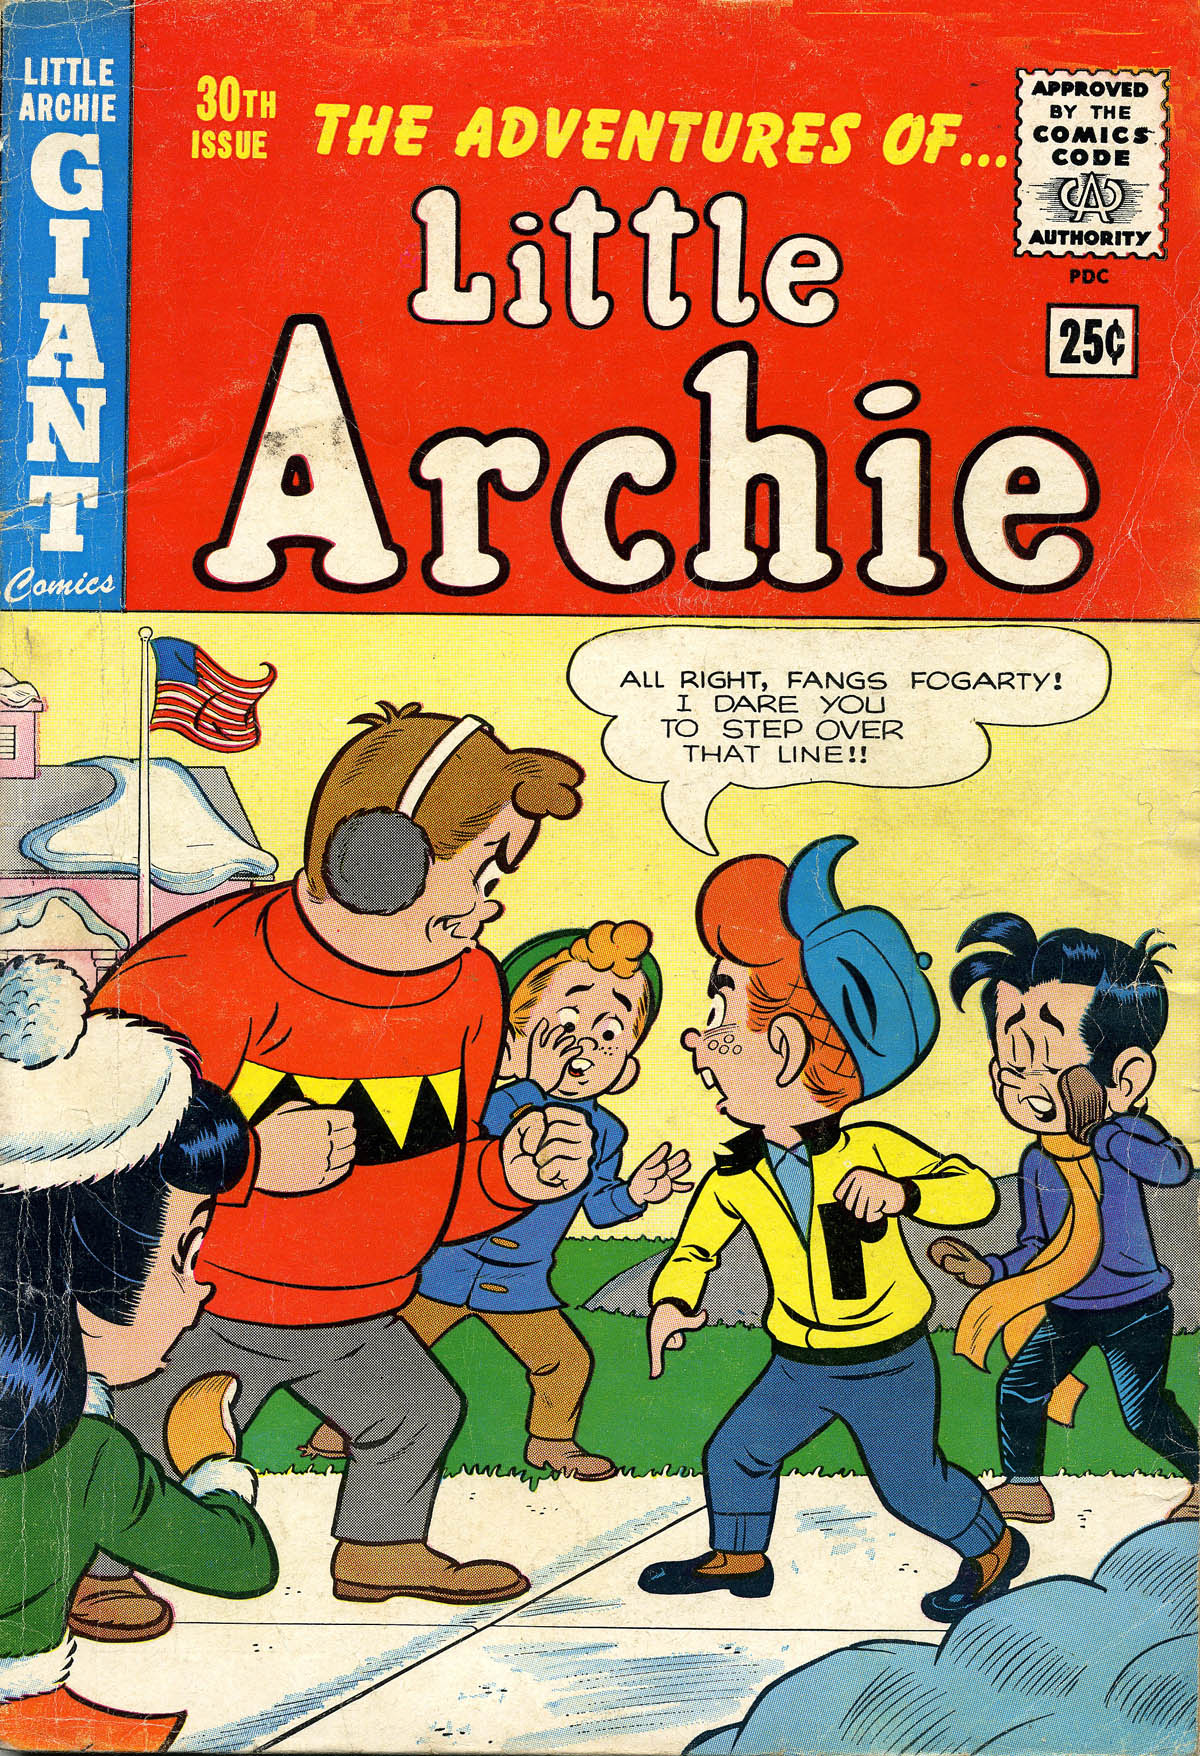 Read online The Adventures of Little Archie comic -  Issue #30 - 1